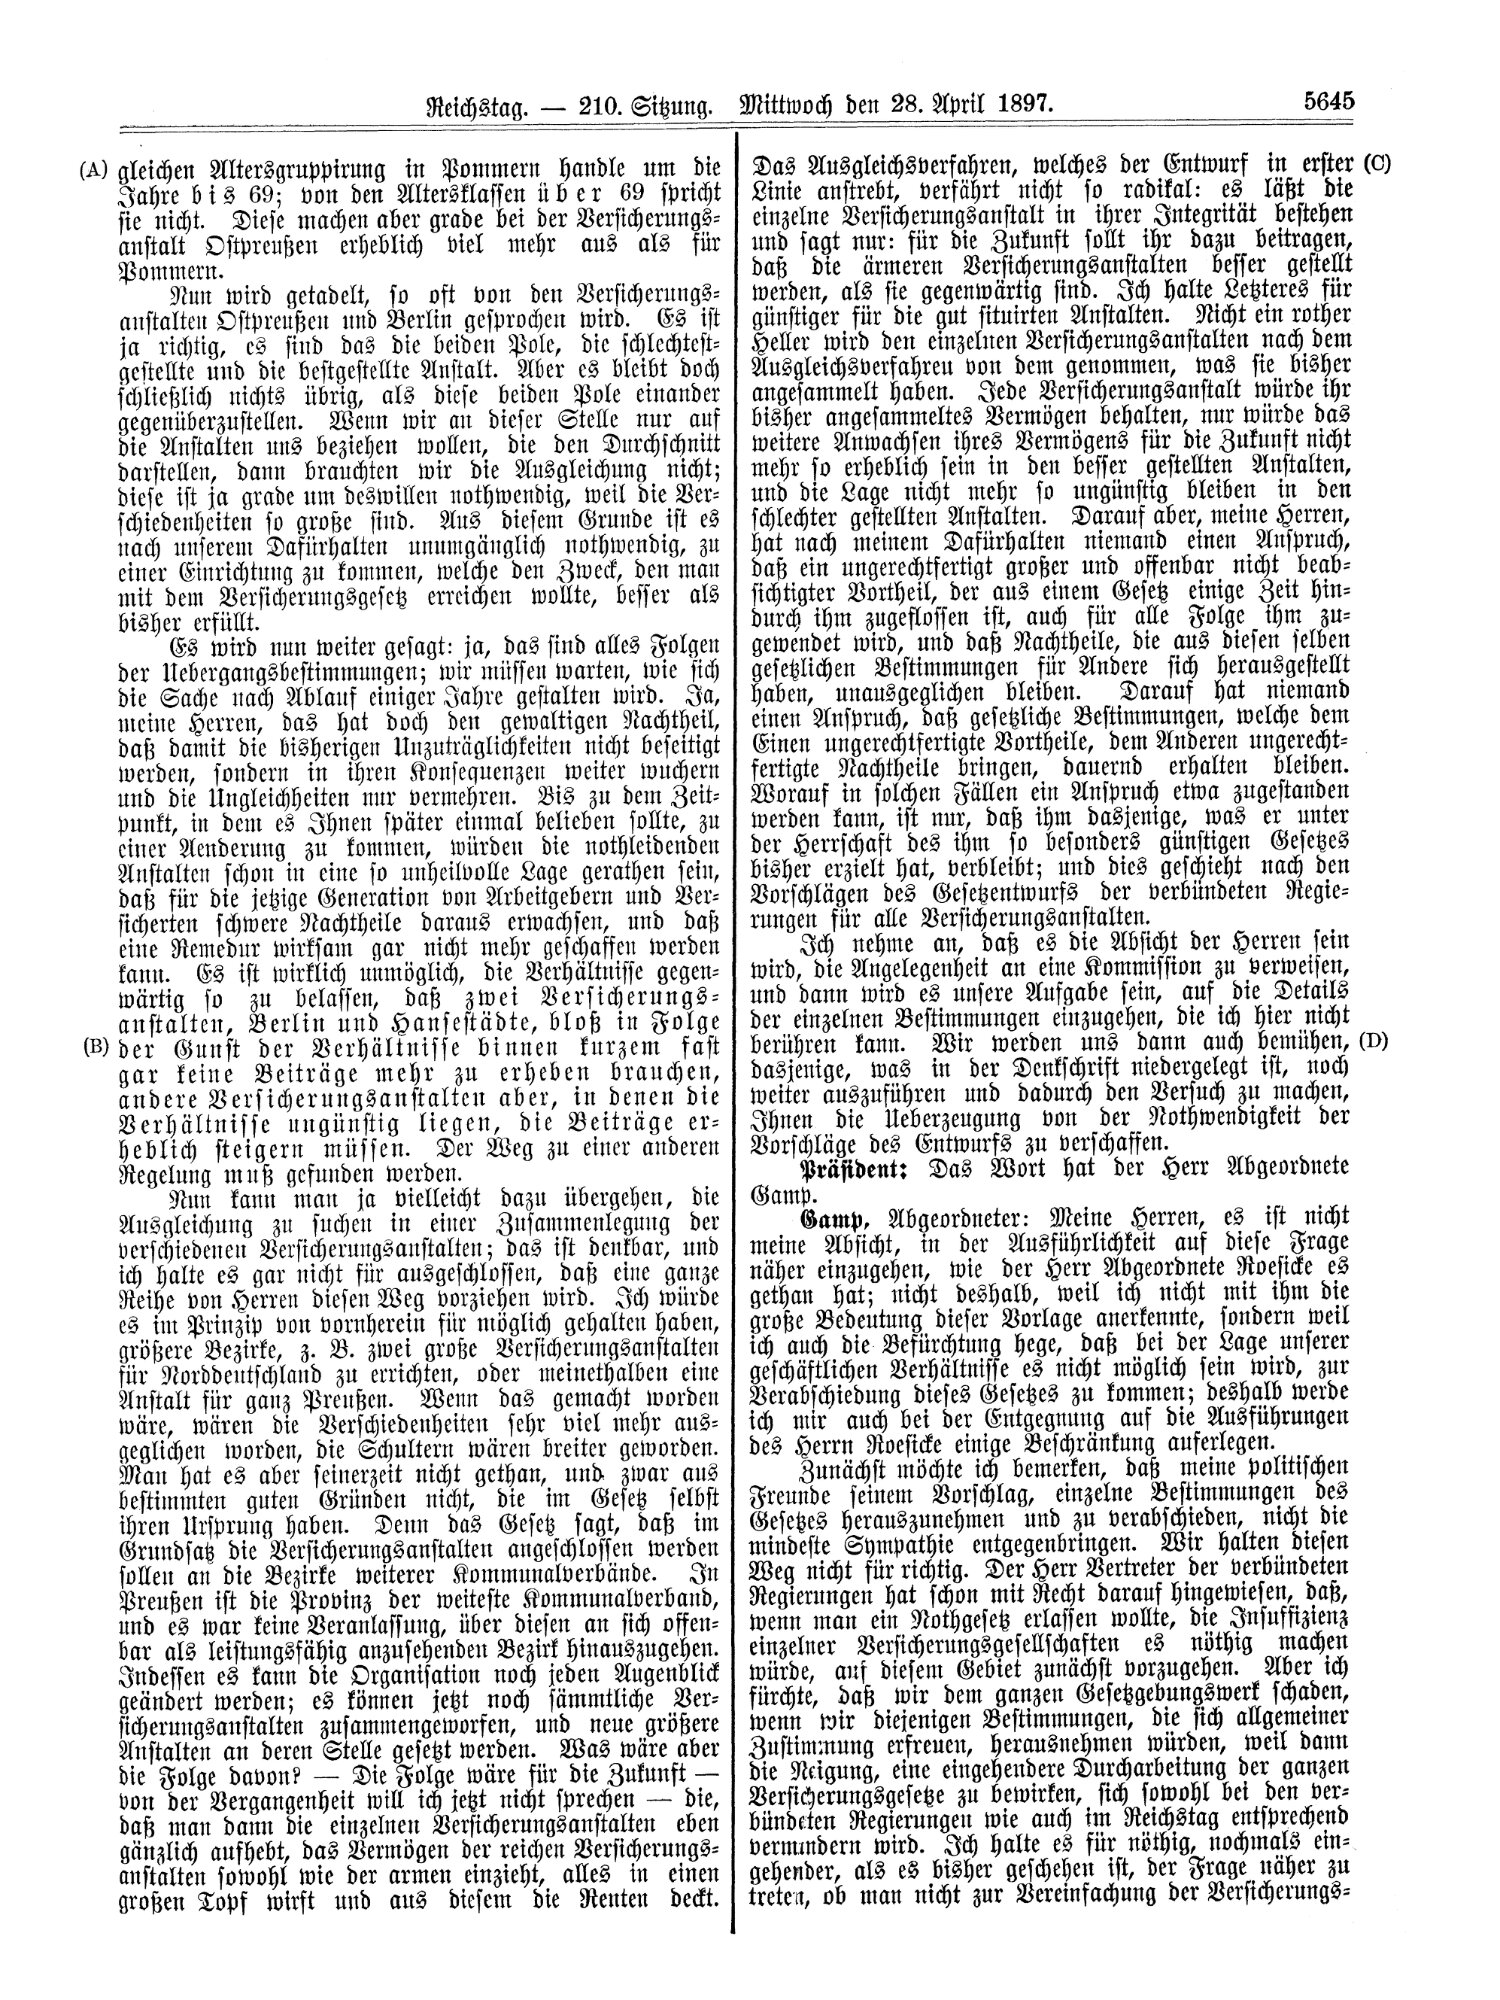 Scan of page 5645